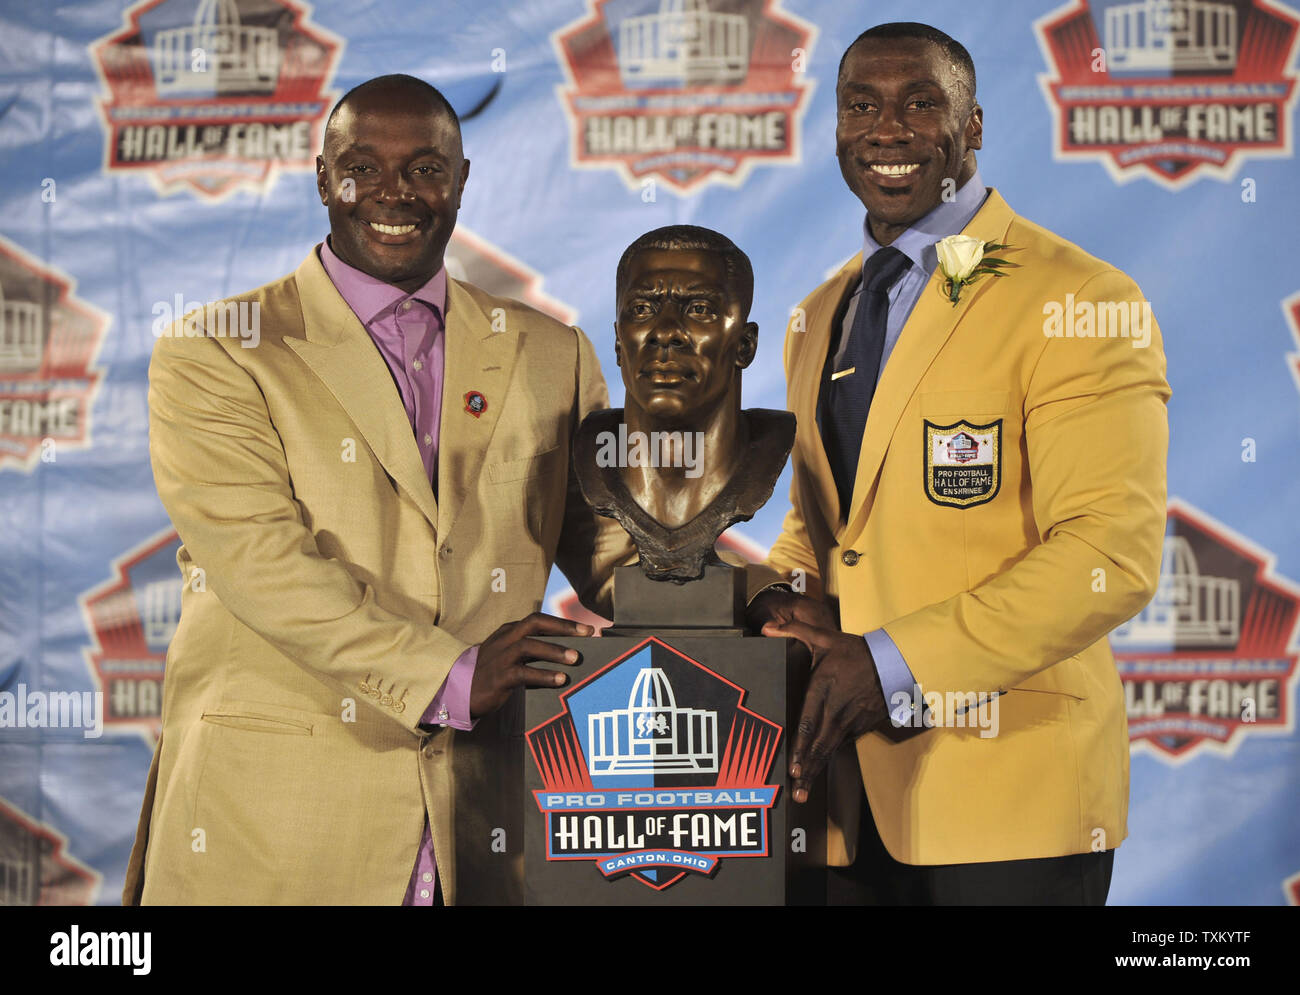 Shannon Sharpe, right, and his brother and presenter Sterling Sharpe pose with Shannon's bronze bust during the Pro Football Hall of Fame Enshrinement Ceremonies at Fawcett Stadium in Canton, Ohio, on August 6, 2011. Shannon Sharpe was inducted with the 2011 class. UPI / David Richard Stock Photo